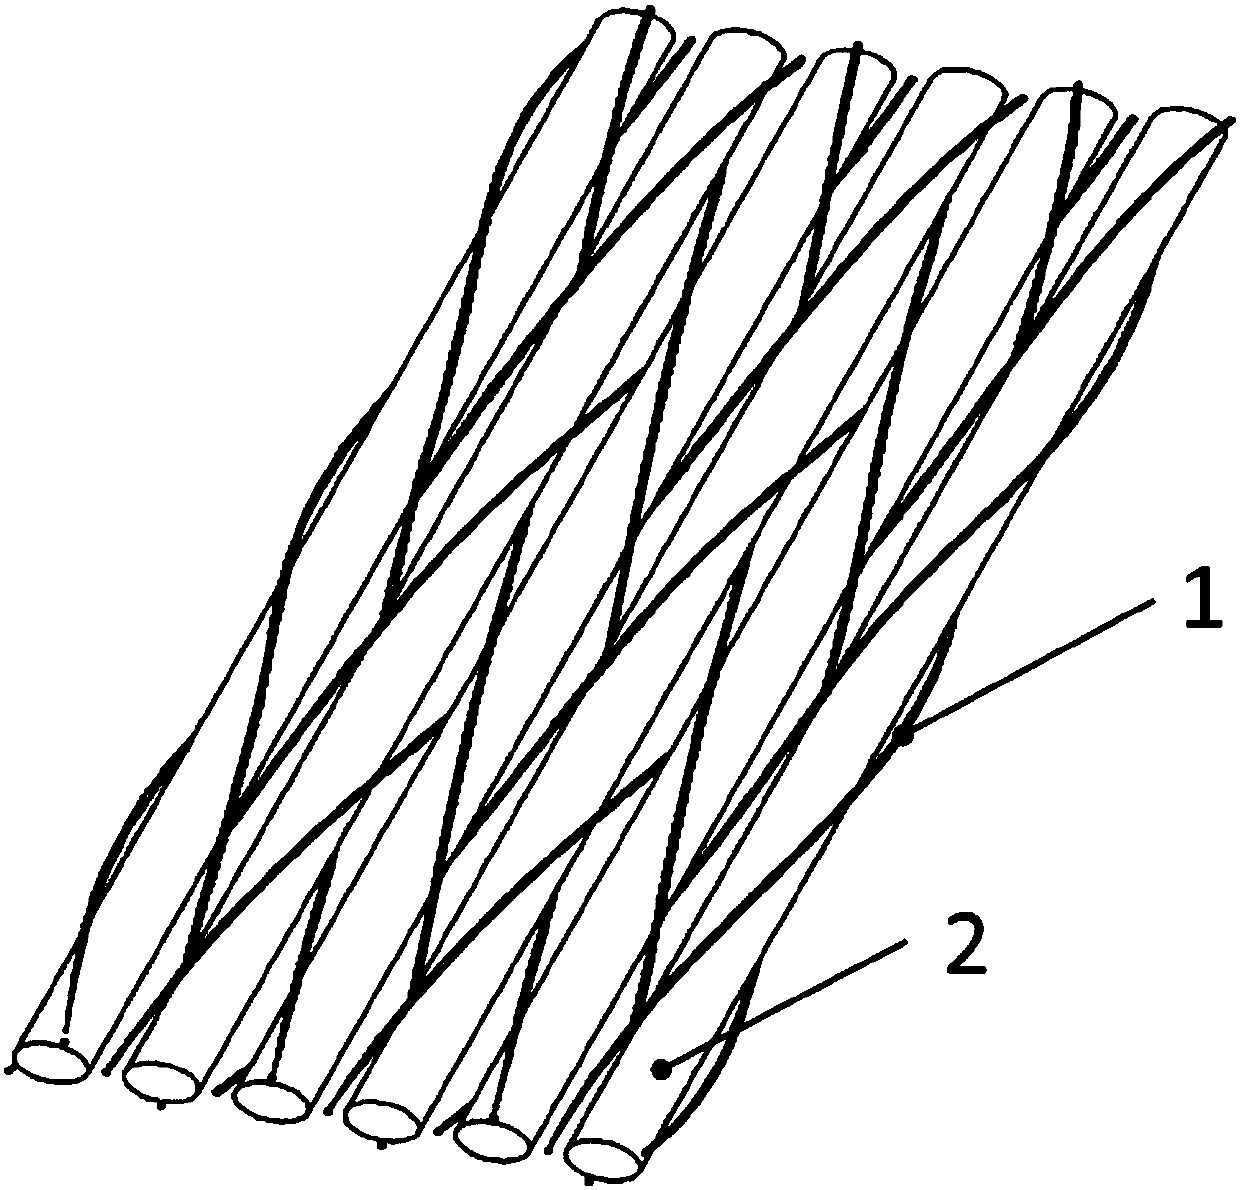 Multi-level structure fabric for radome and its weaving method